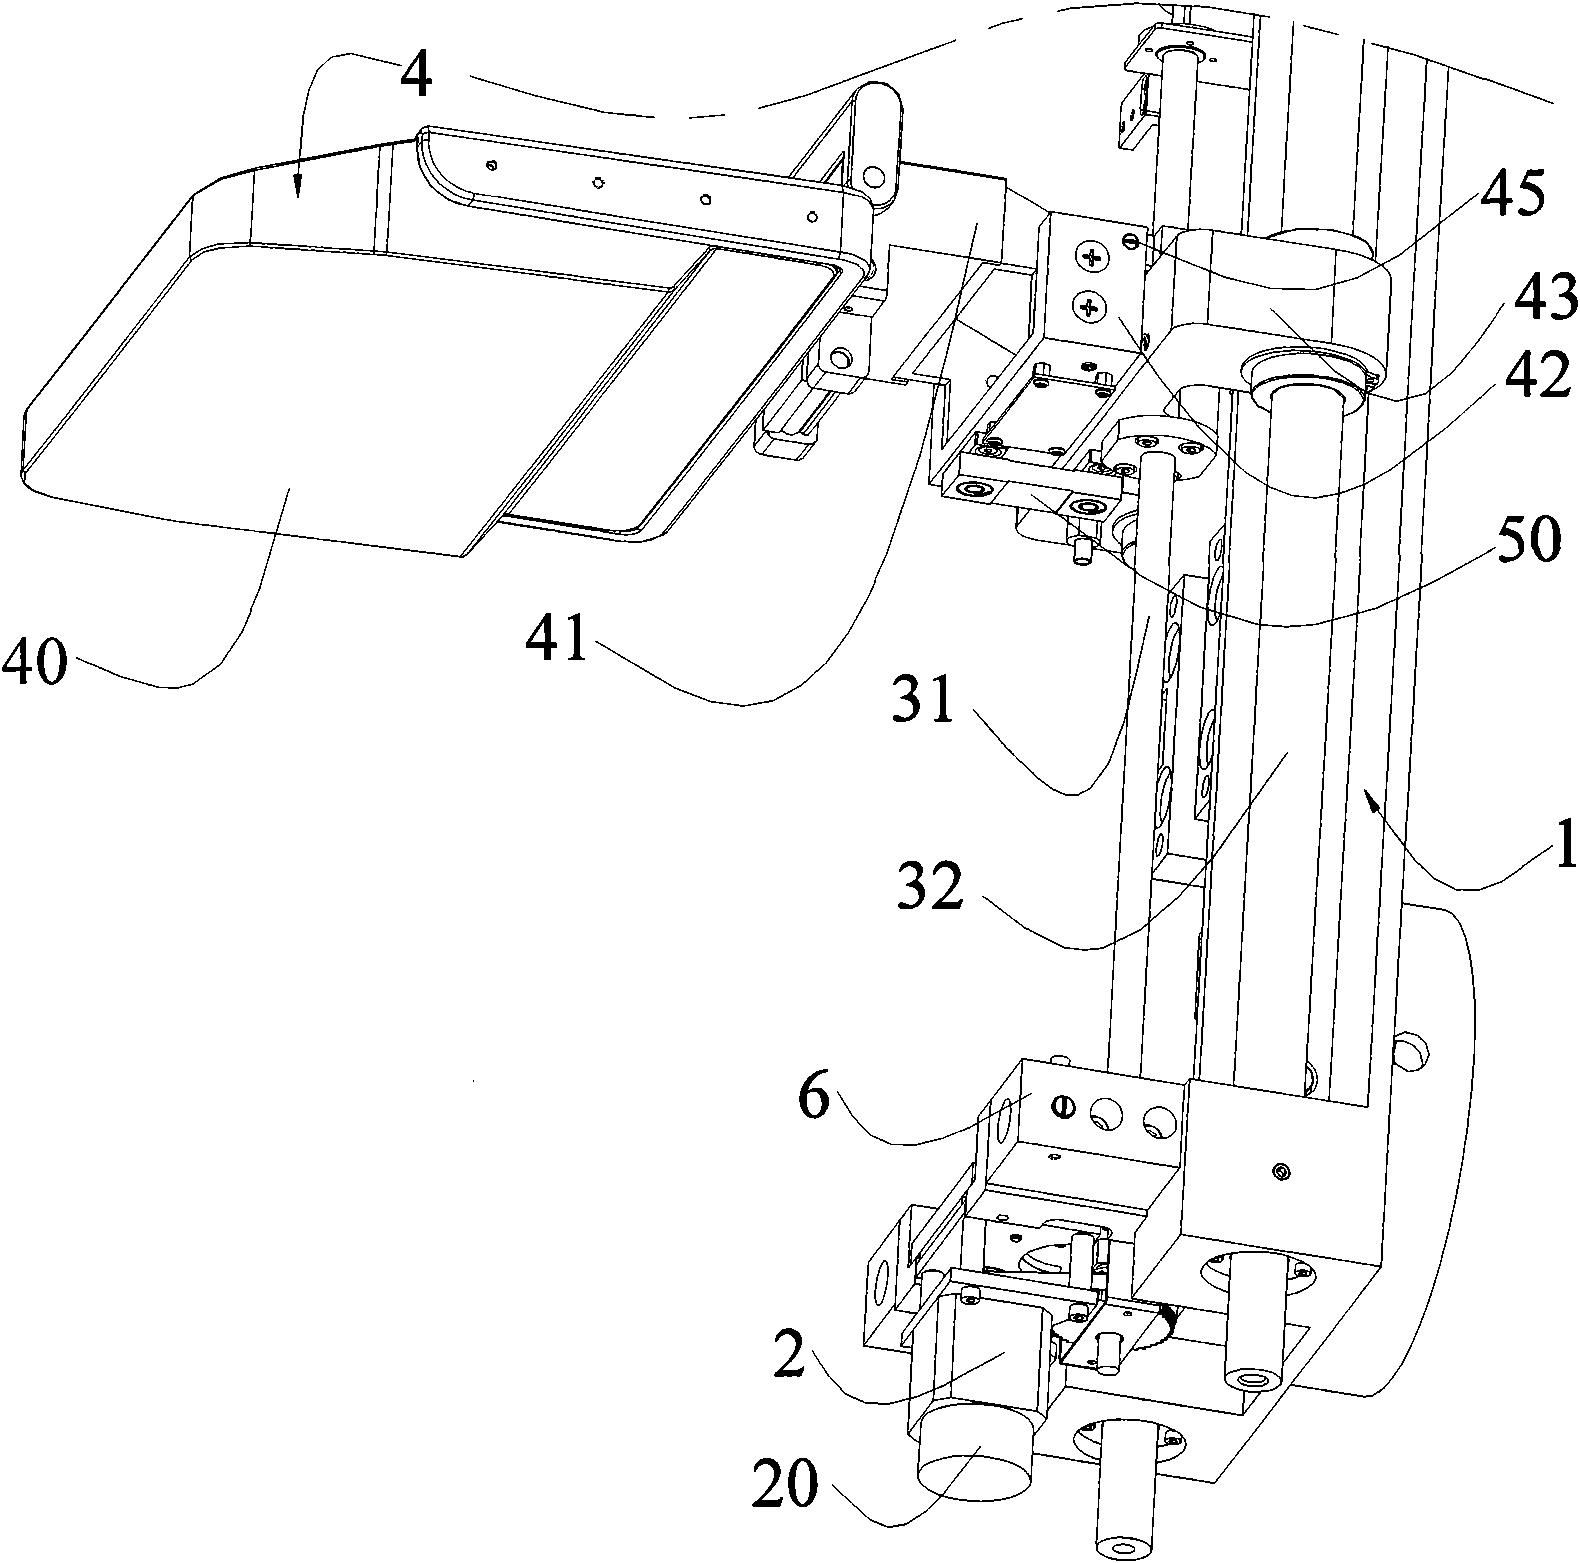 Breast X-ray machine and method for realizing fully automatic exposure